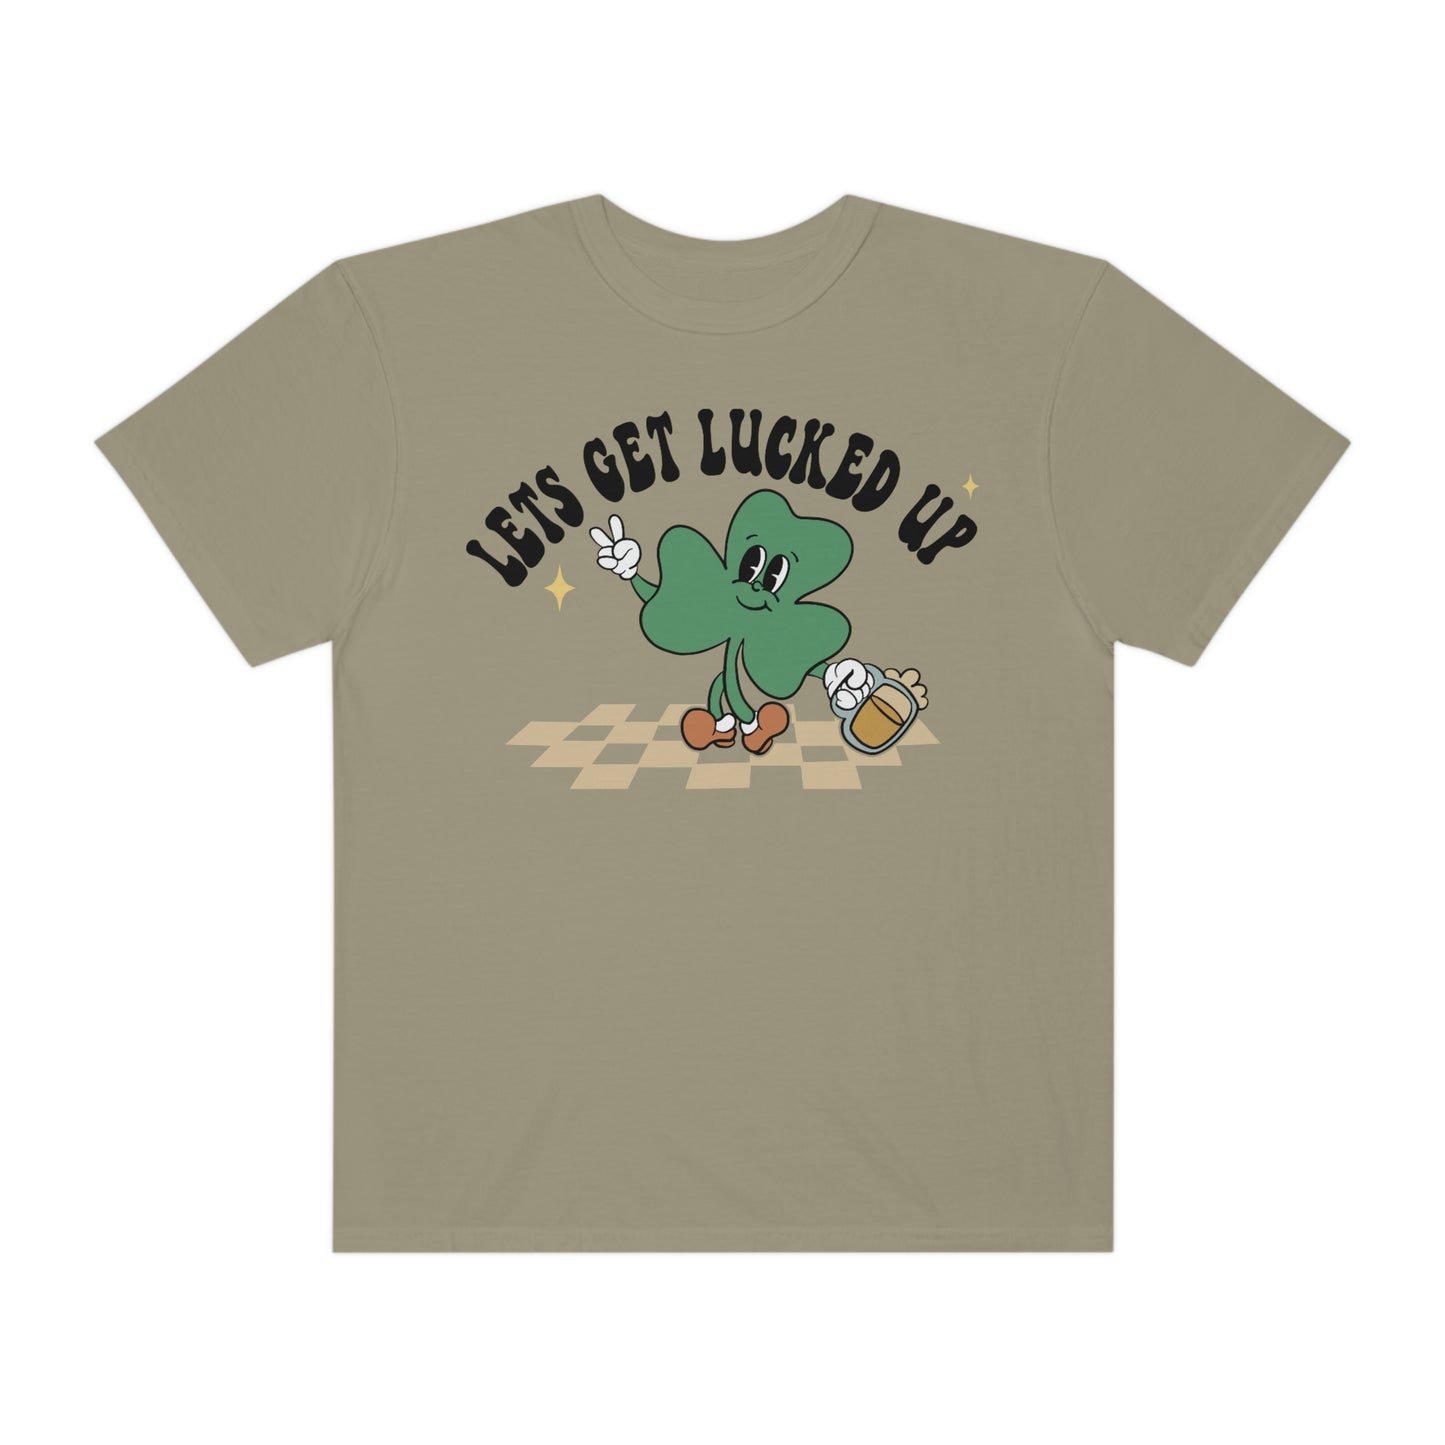 Lets Get Lucked Up - T-Shirt